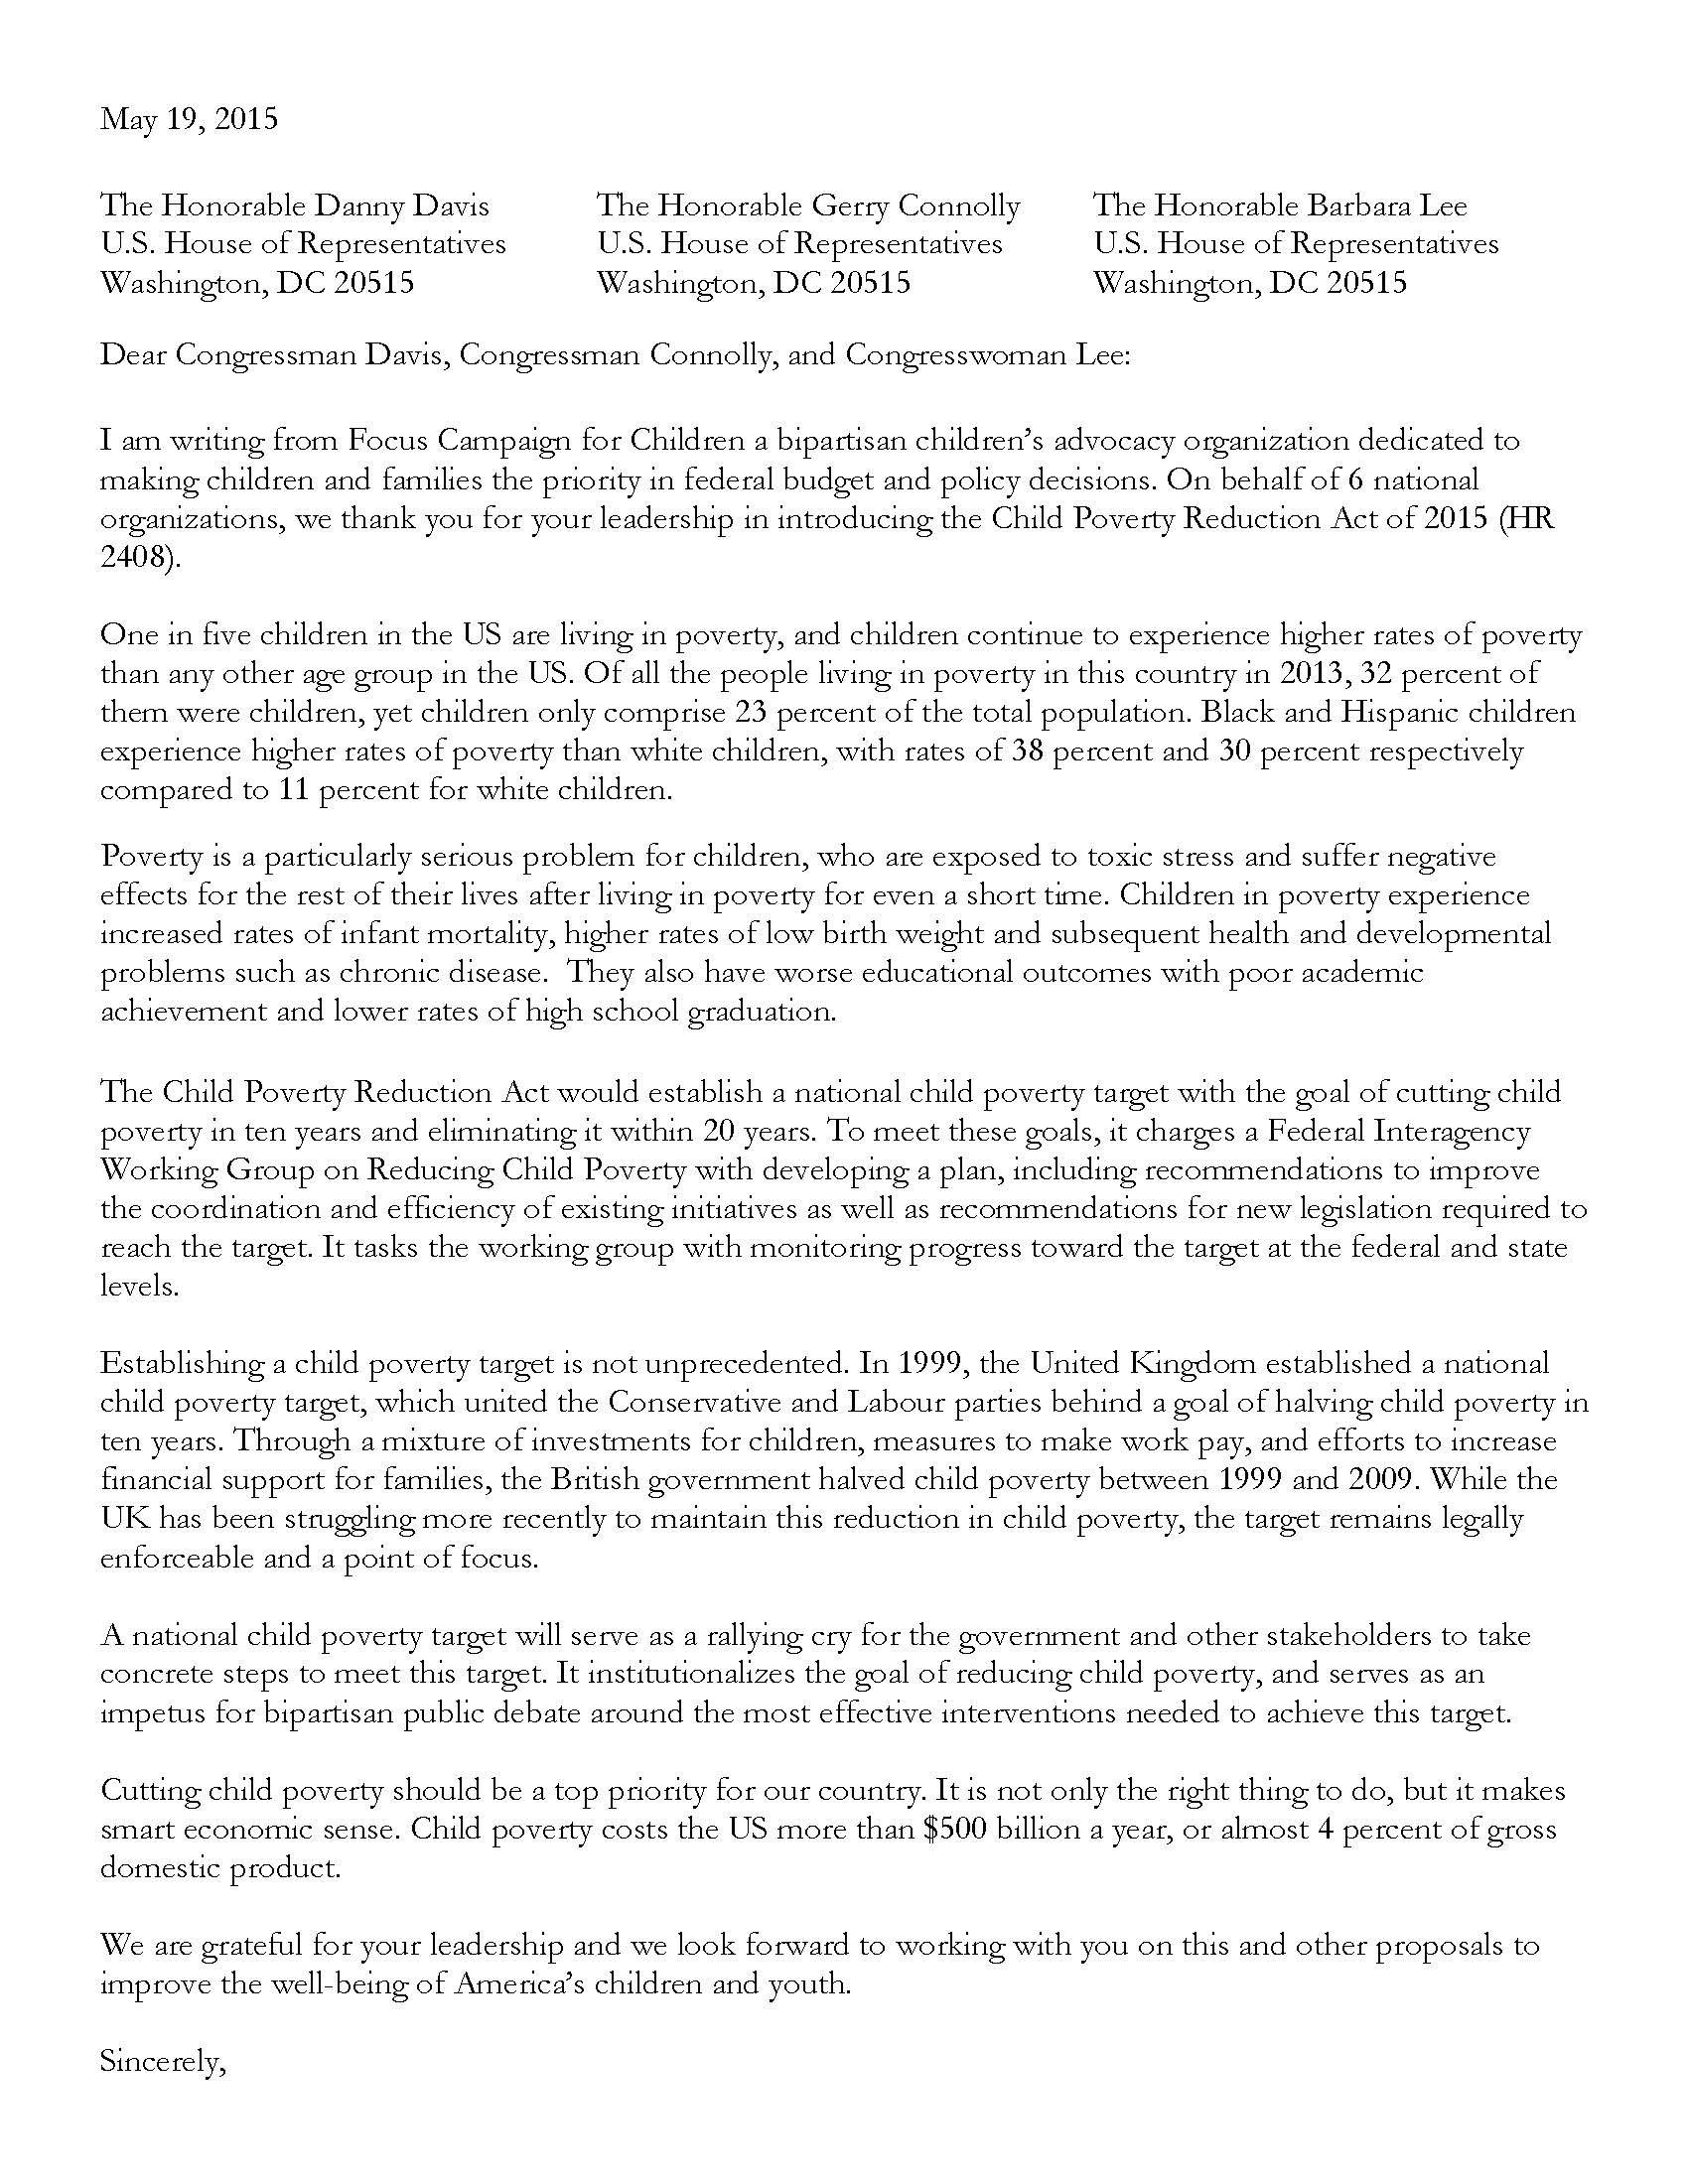 Letter of Support for Child Poverty Target Legislation_Page_1